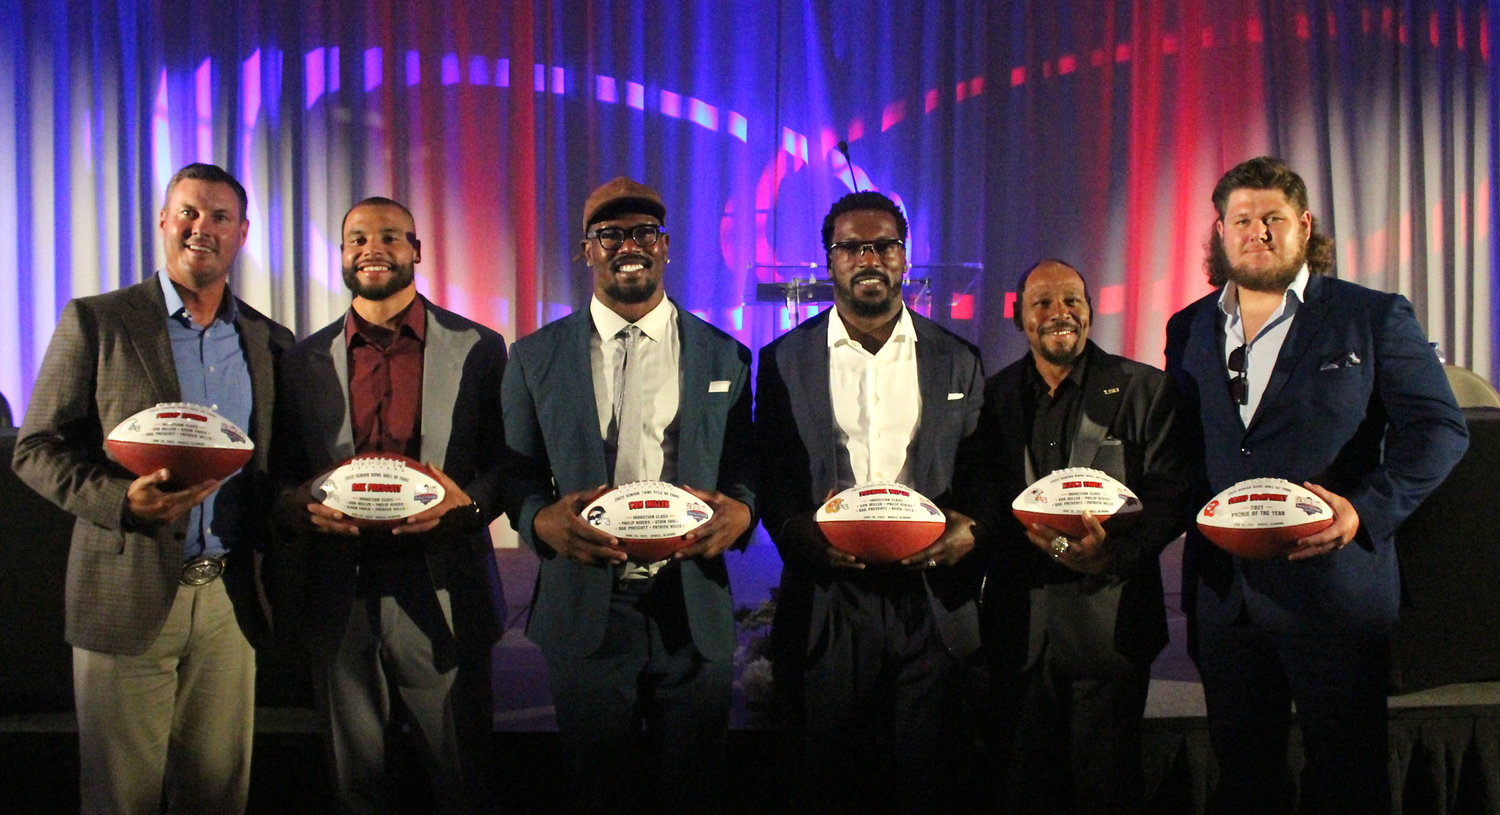 The Senior Bowl’s 33rd Hall of Fame class was honored during a ceremony at the Grand Hotel Golf Club & Spa in Point Clear Sunday night, June 26. Pictured from the left are inductees Philip Rivers, Dak Prescott, Von Miller, Patrick Willis and Kevin Faulk along with Rookie of the Year Creed Humphrey.